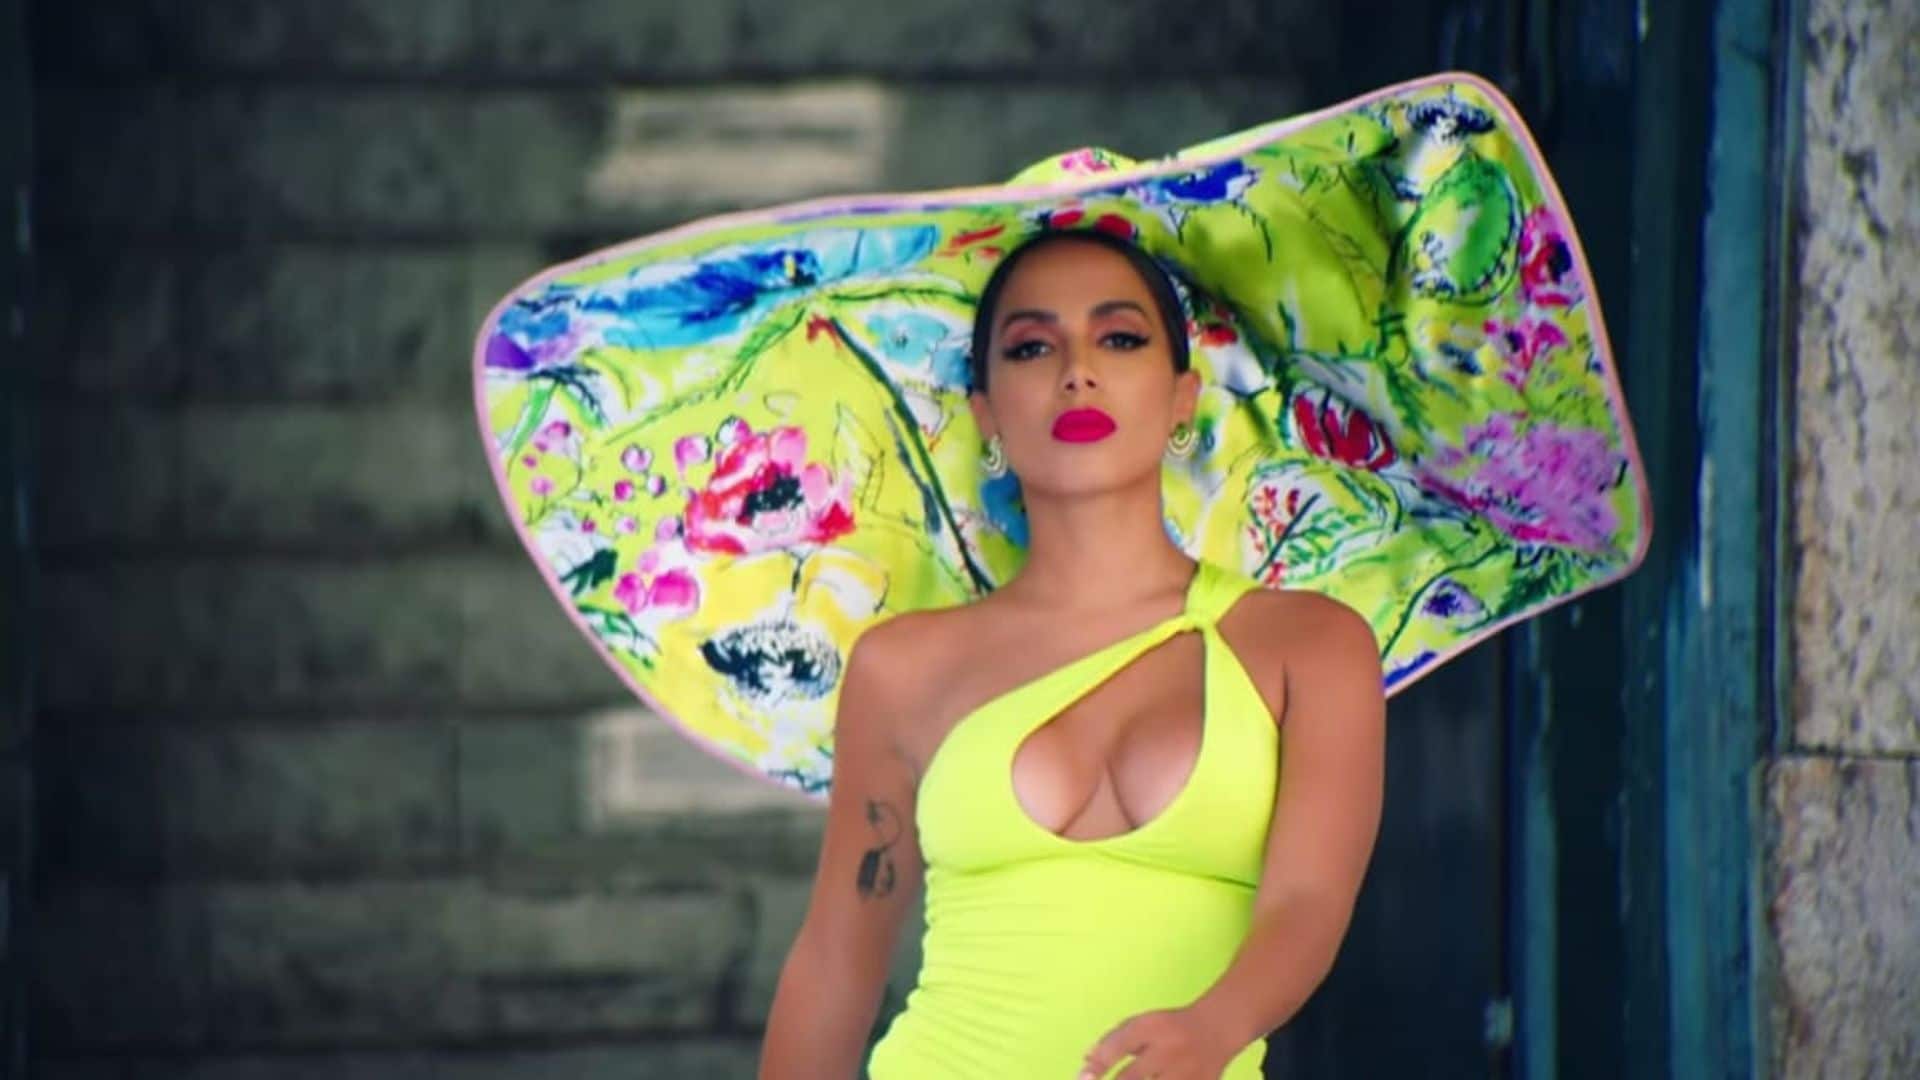 Anitta’s new song and video ‘Me Gusta’ features Cardi B and Myke Towers